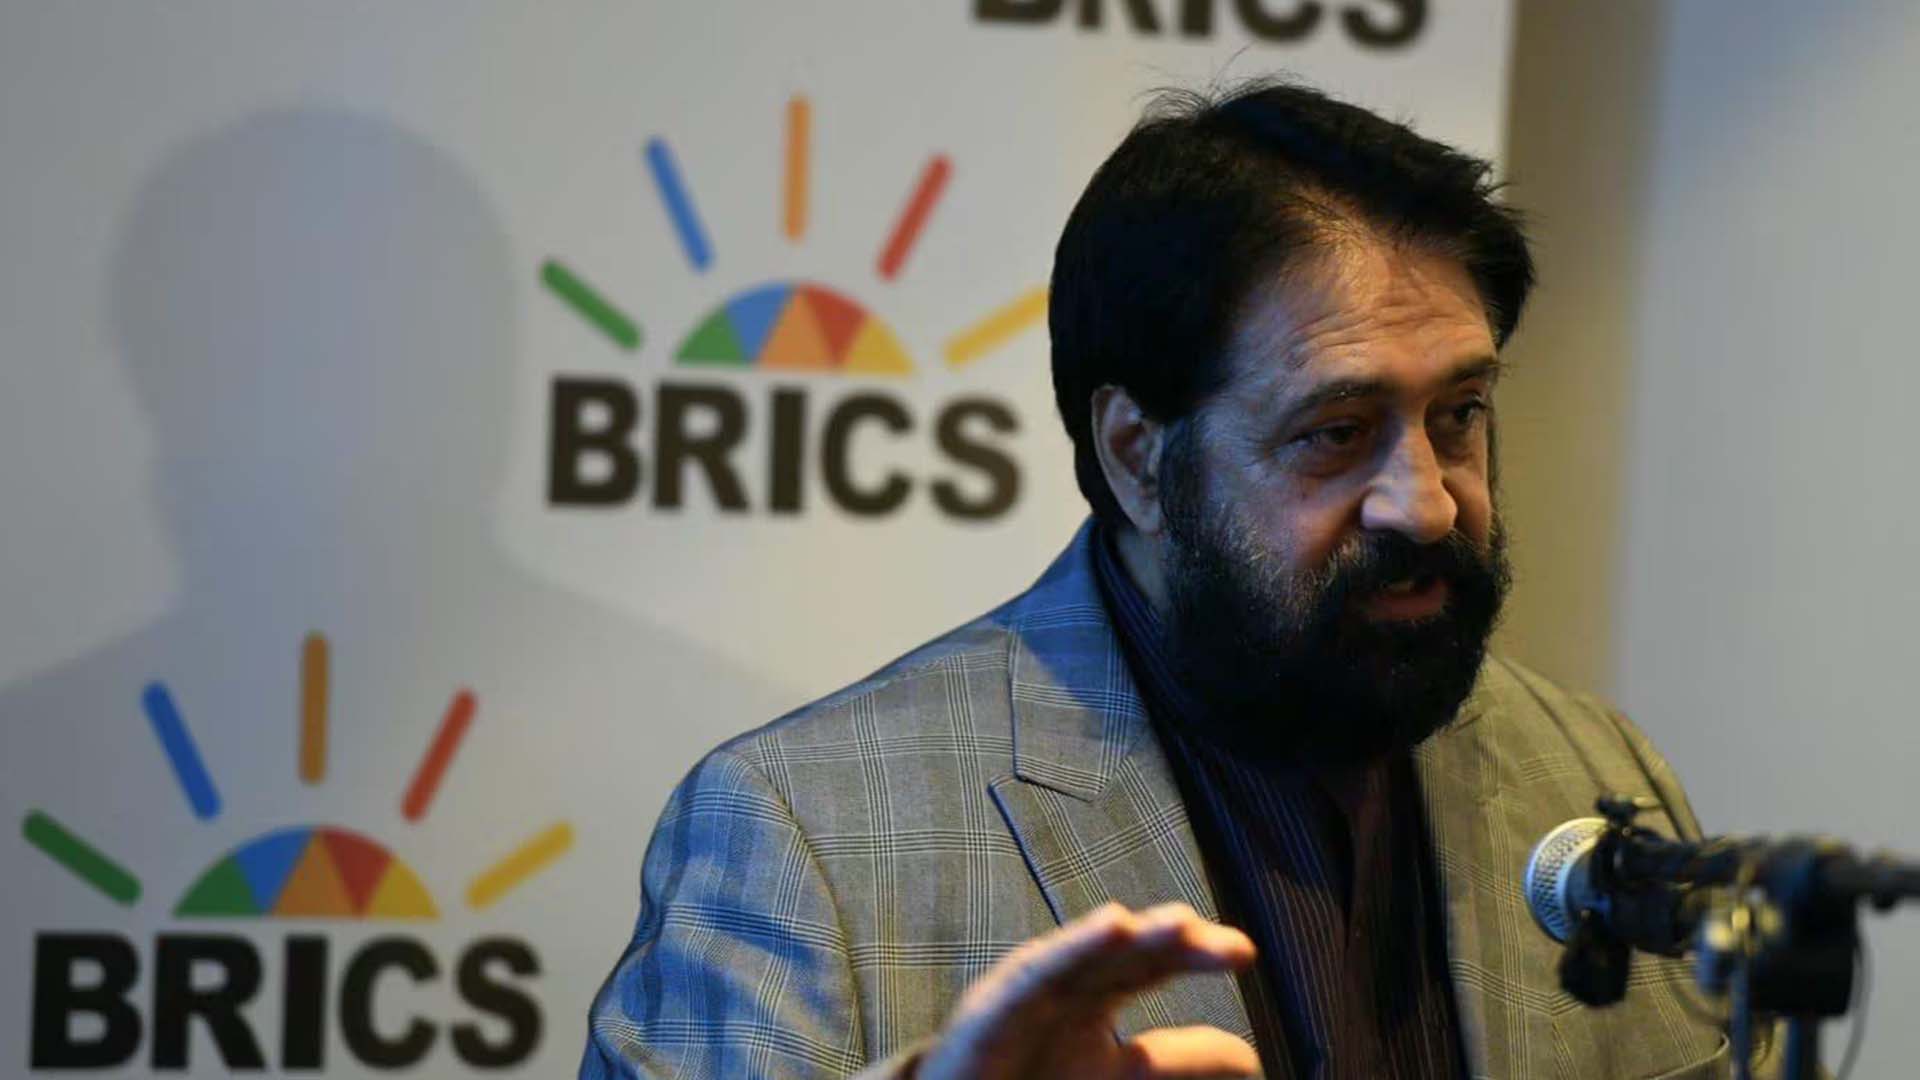 Anil Sooklal, South Africa's key diplomat for BRICS relations